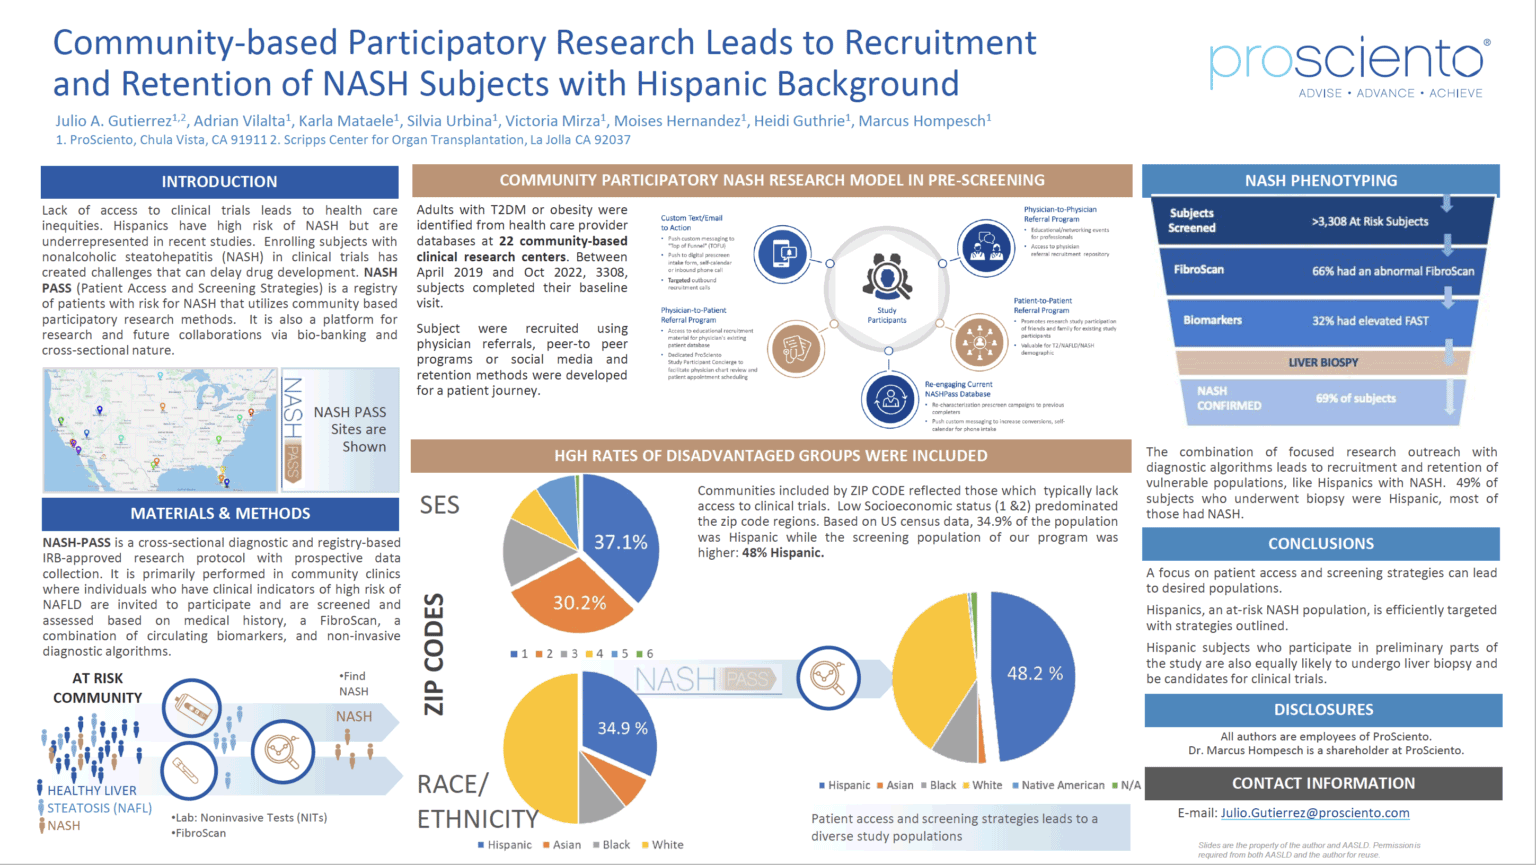 image of Community-Based Participatory Research Leads to Recruitment and Retention of NASH Subjects with Hispanic Background